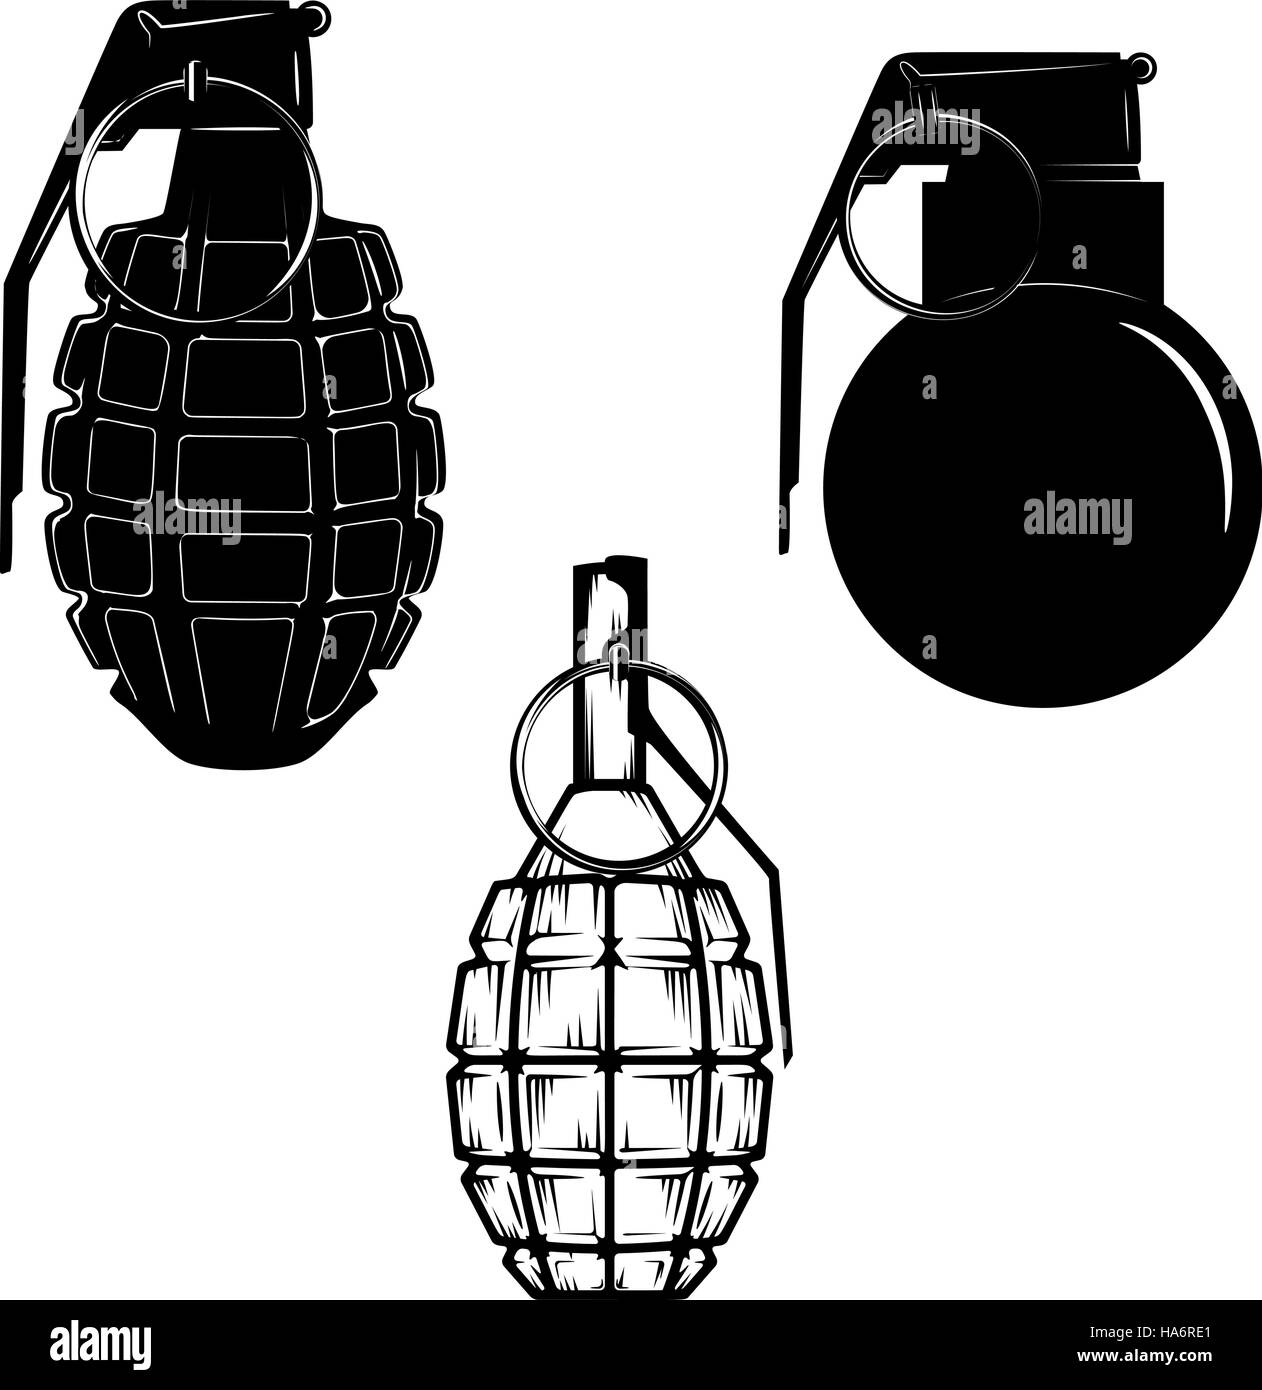 Set of hand grenades isolated on white background. Design elements in vector. Stock Vector